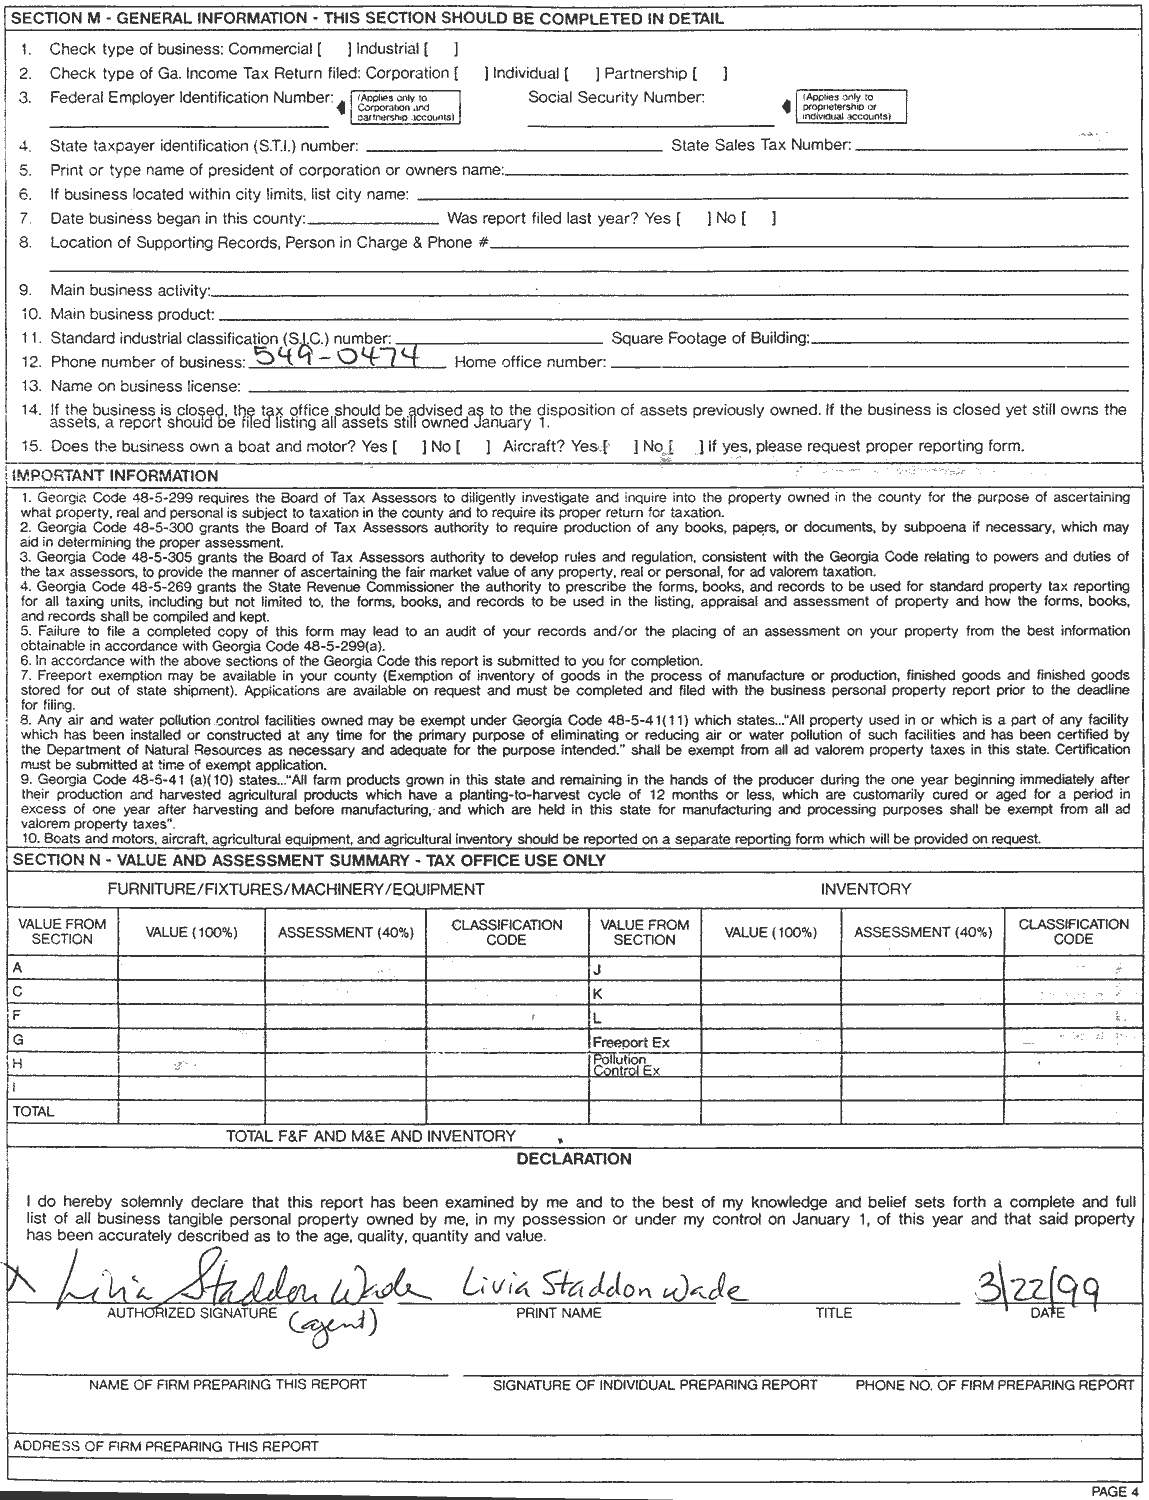 1999 Business Personal Property Report - alternate - page 4